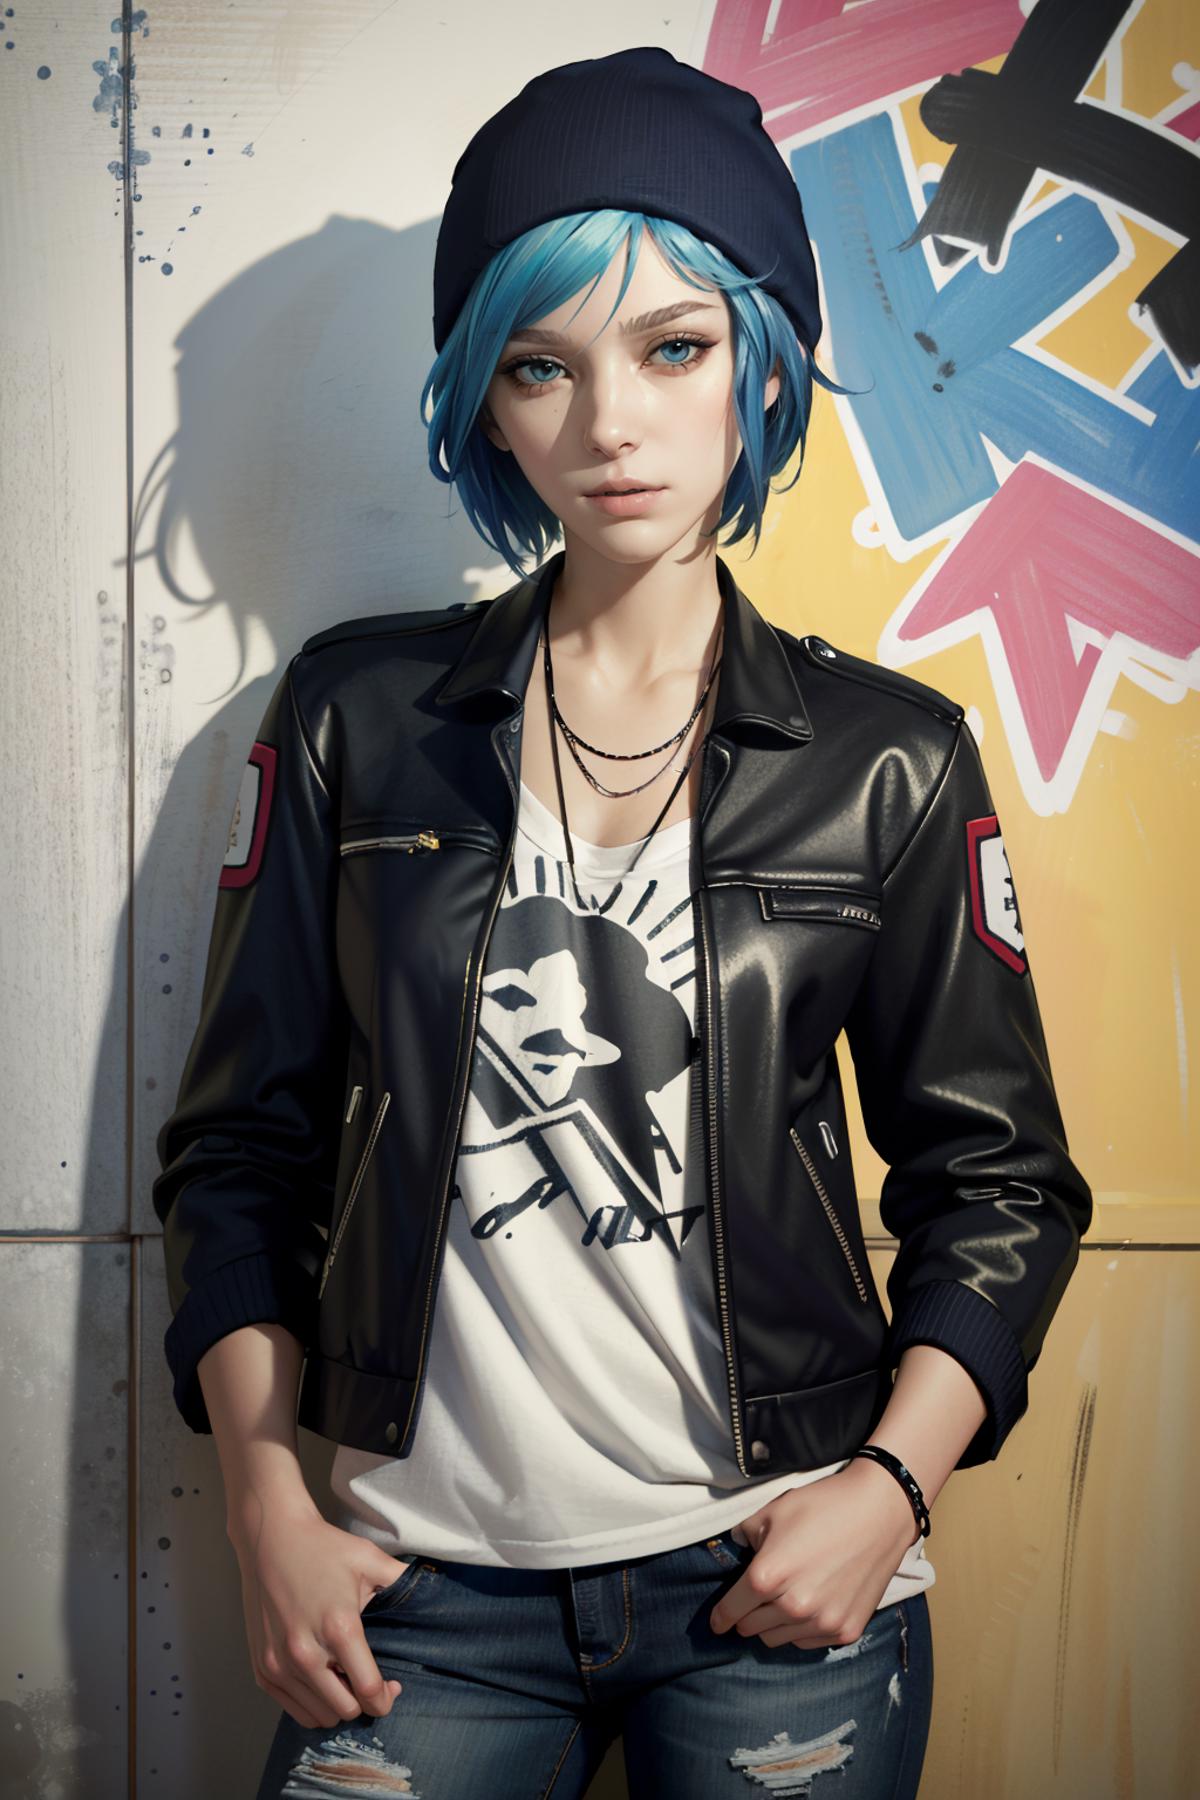 Chloe Price from Life is Strange image by BloodRedKittie